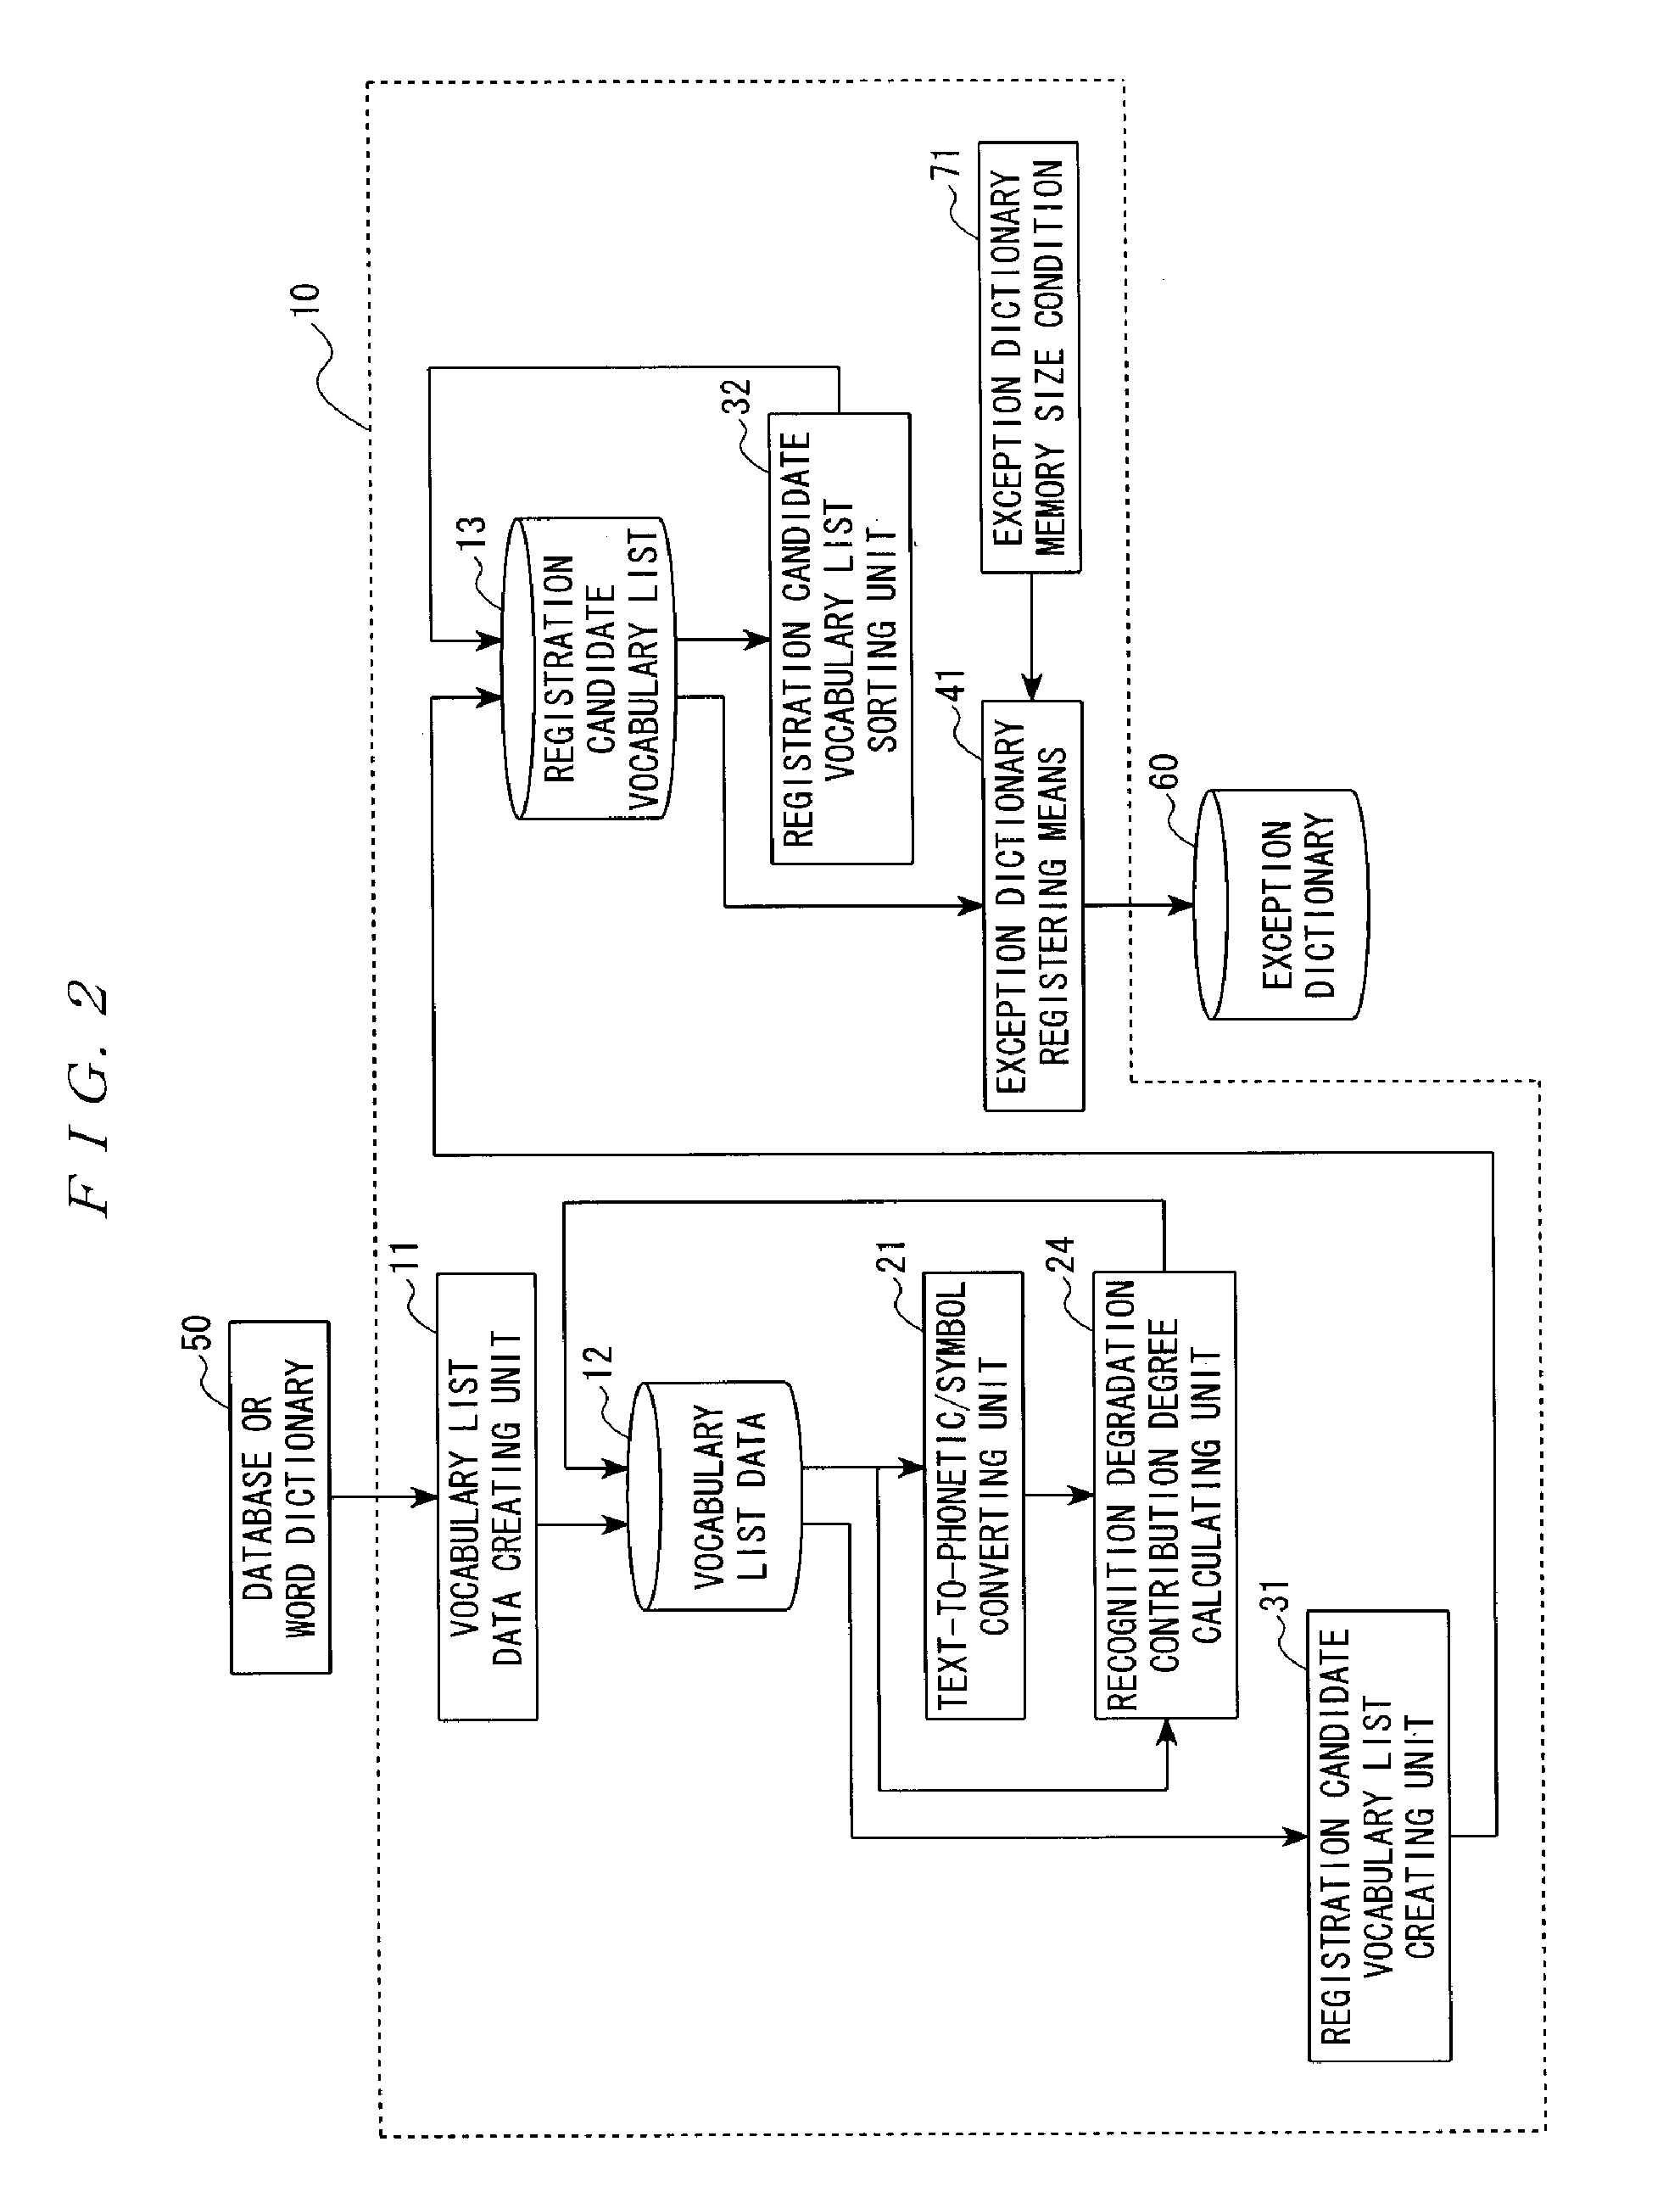 Exception dictionary creating unit, exception dictionary creating method, and program therefor, as well as speech recognition unit and speech recognition method